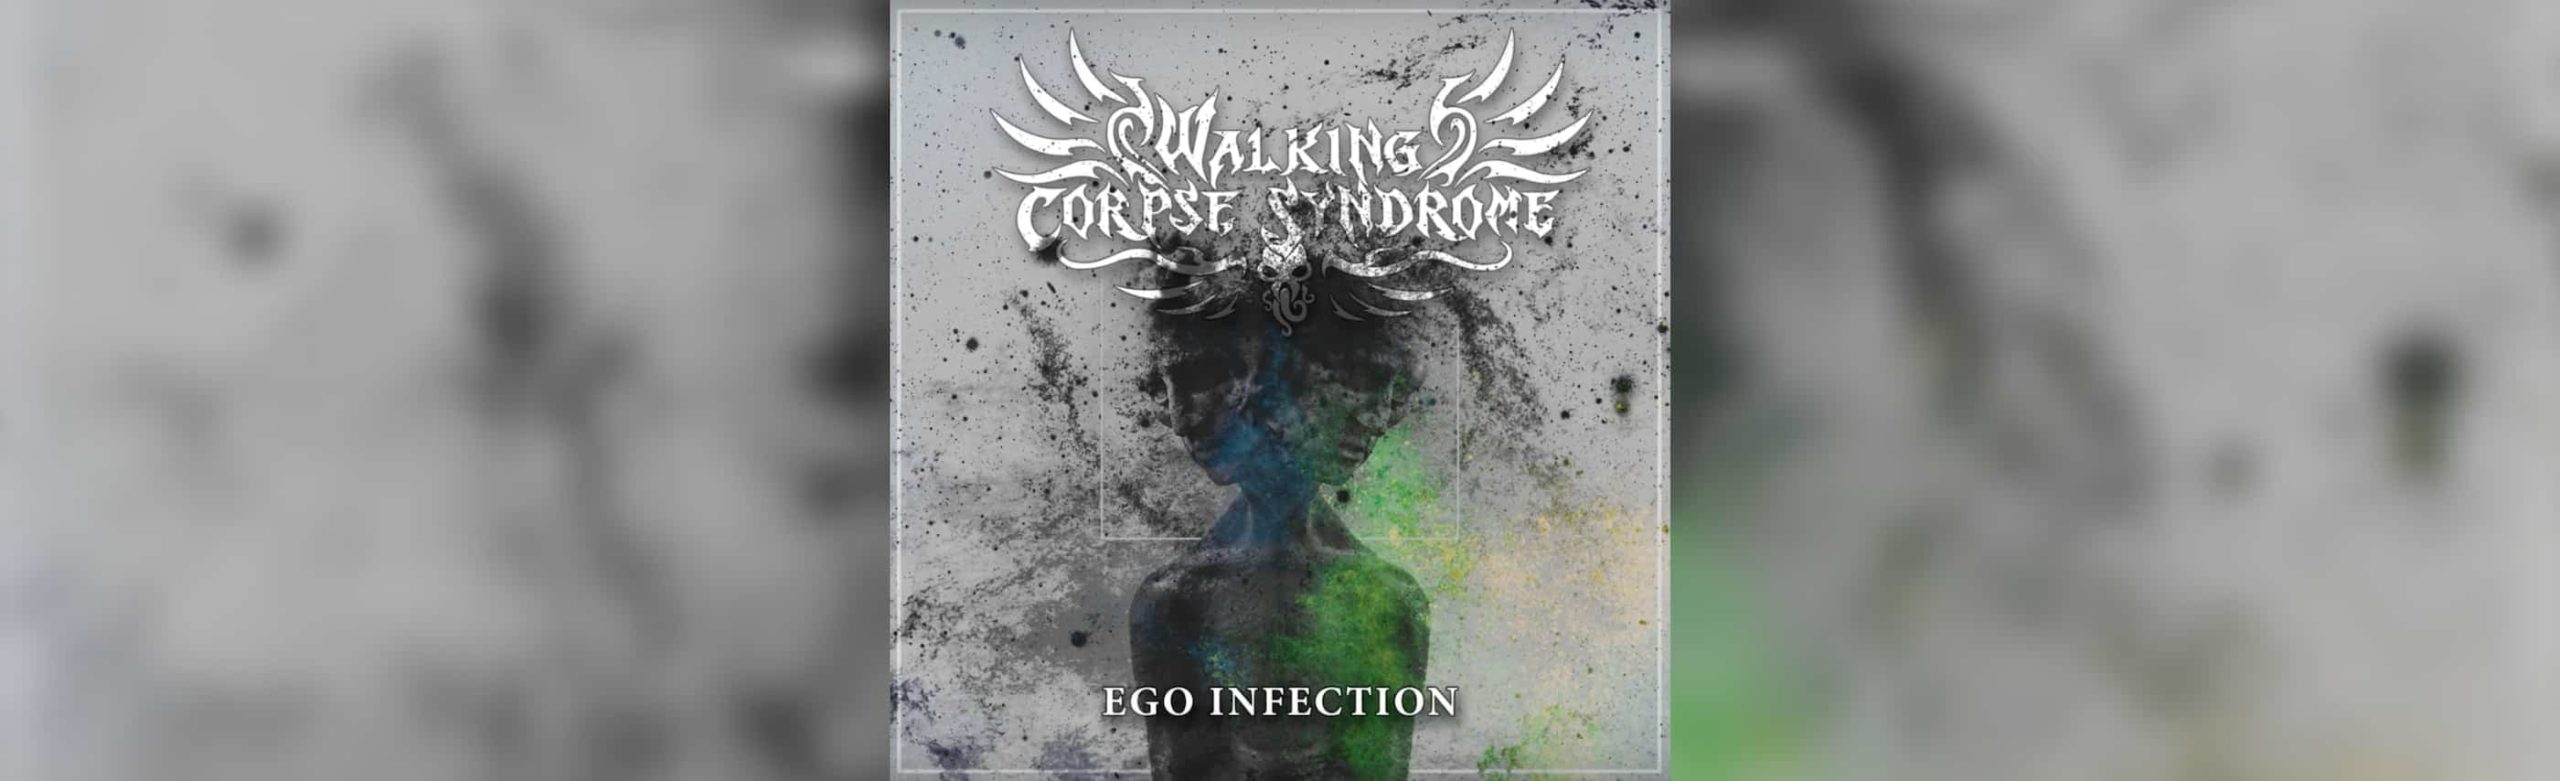 Walking Corpse Syndrome Release New Single “Ego Infection” Ahead of Missoula Concert Image